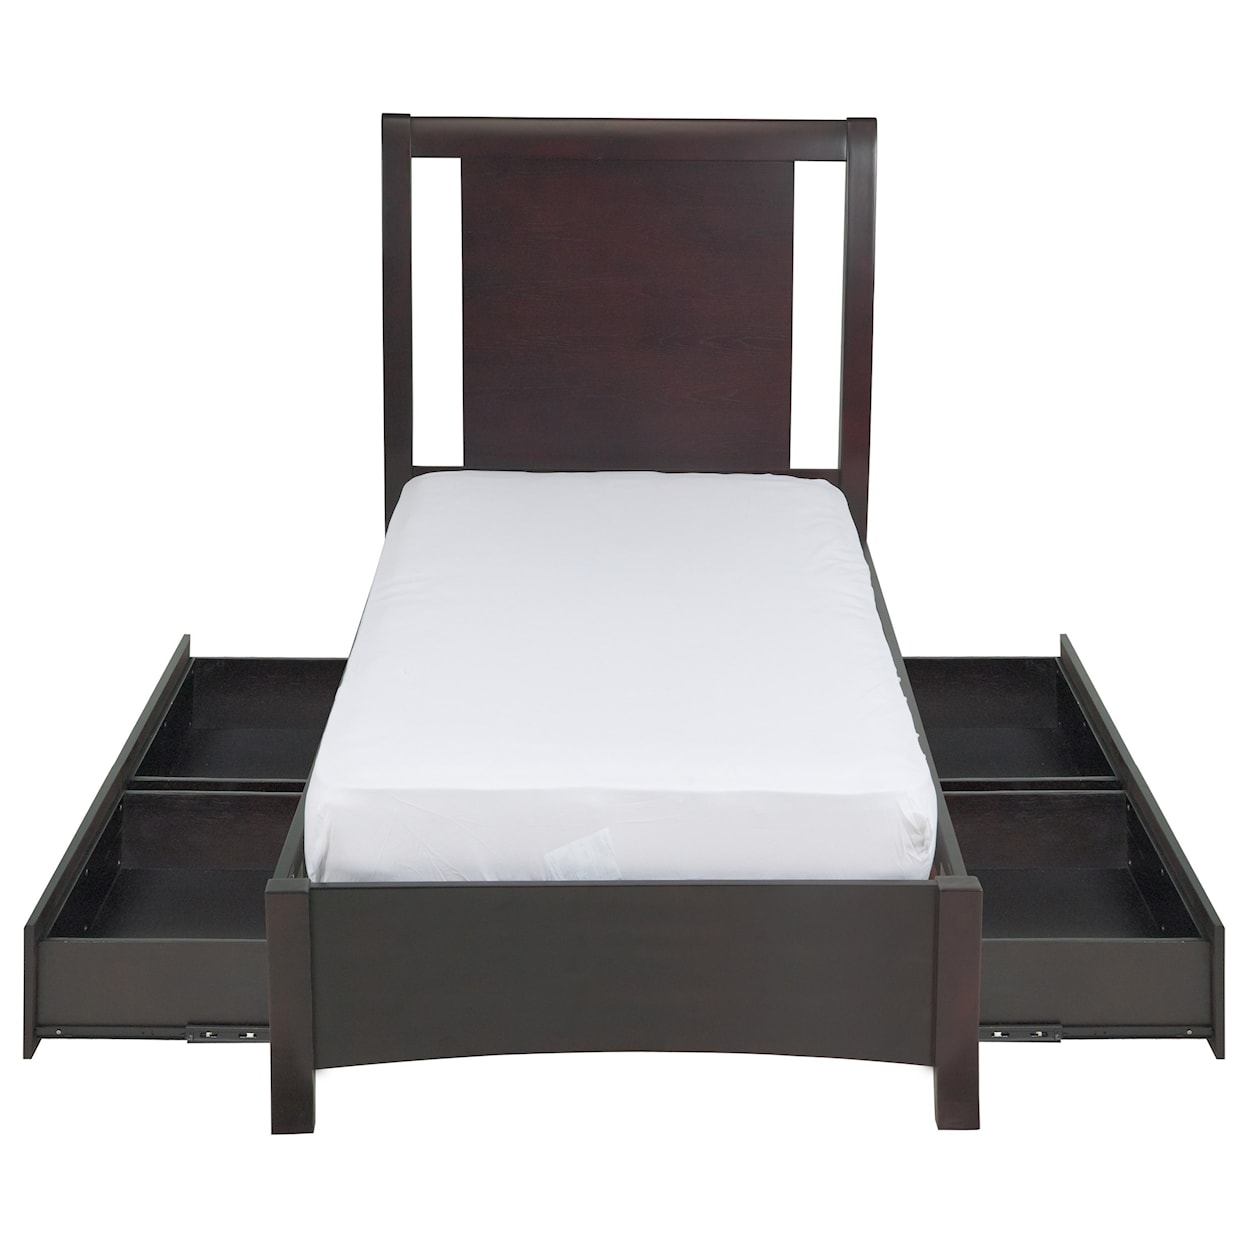 Modus International Nevis Twin Low Profile Bed with Storage